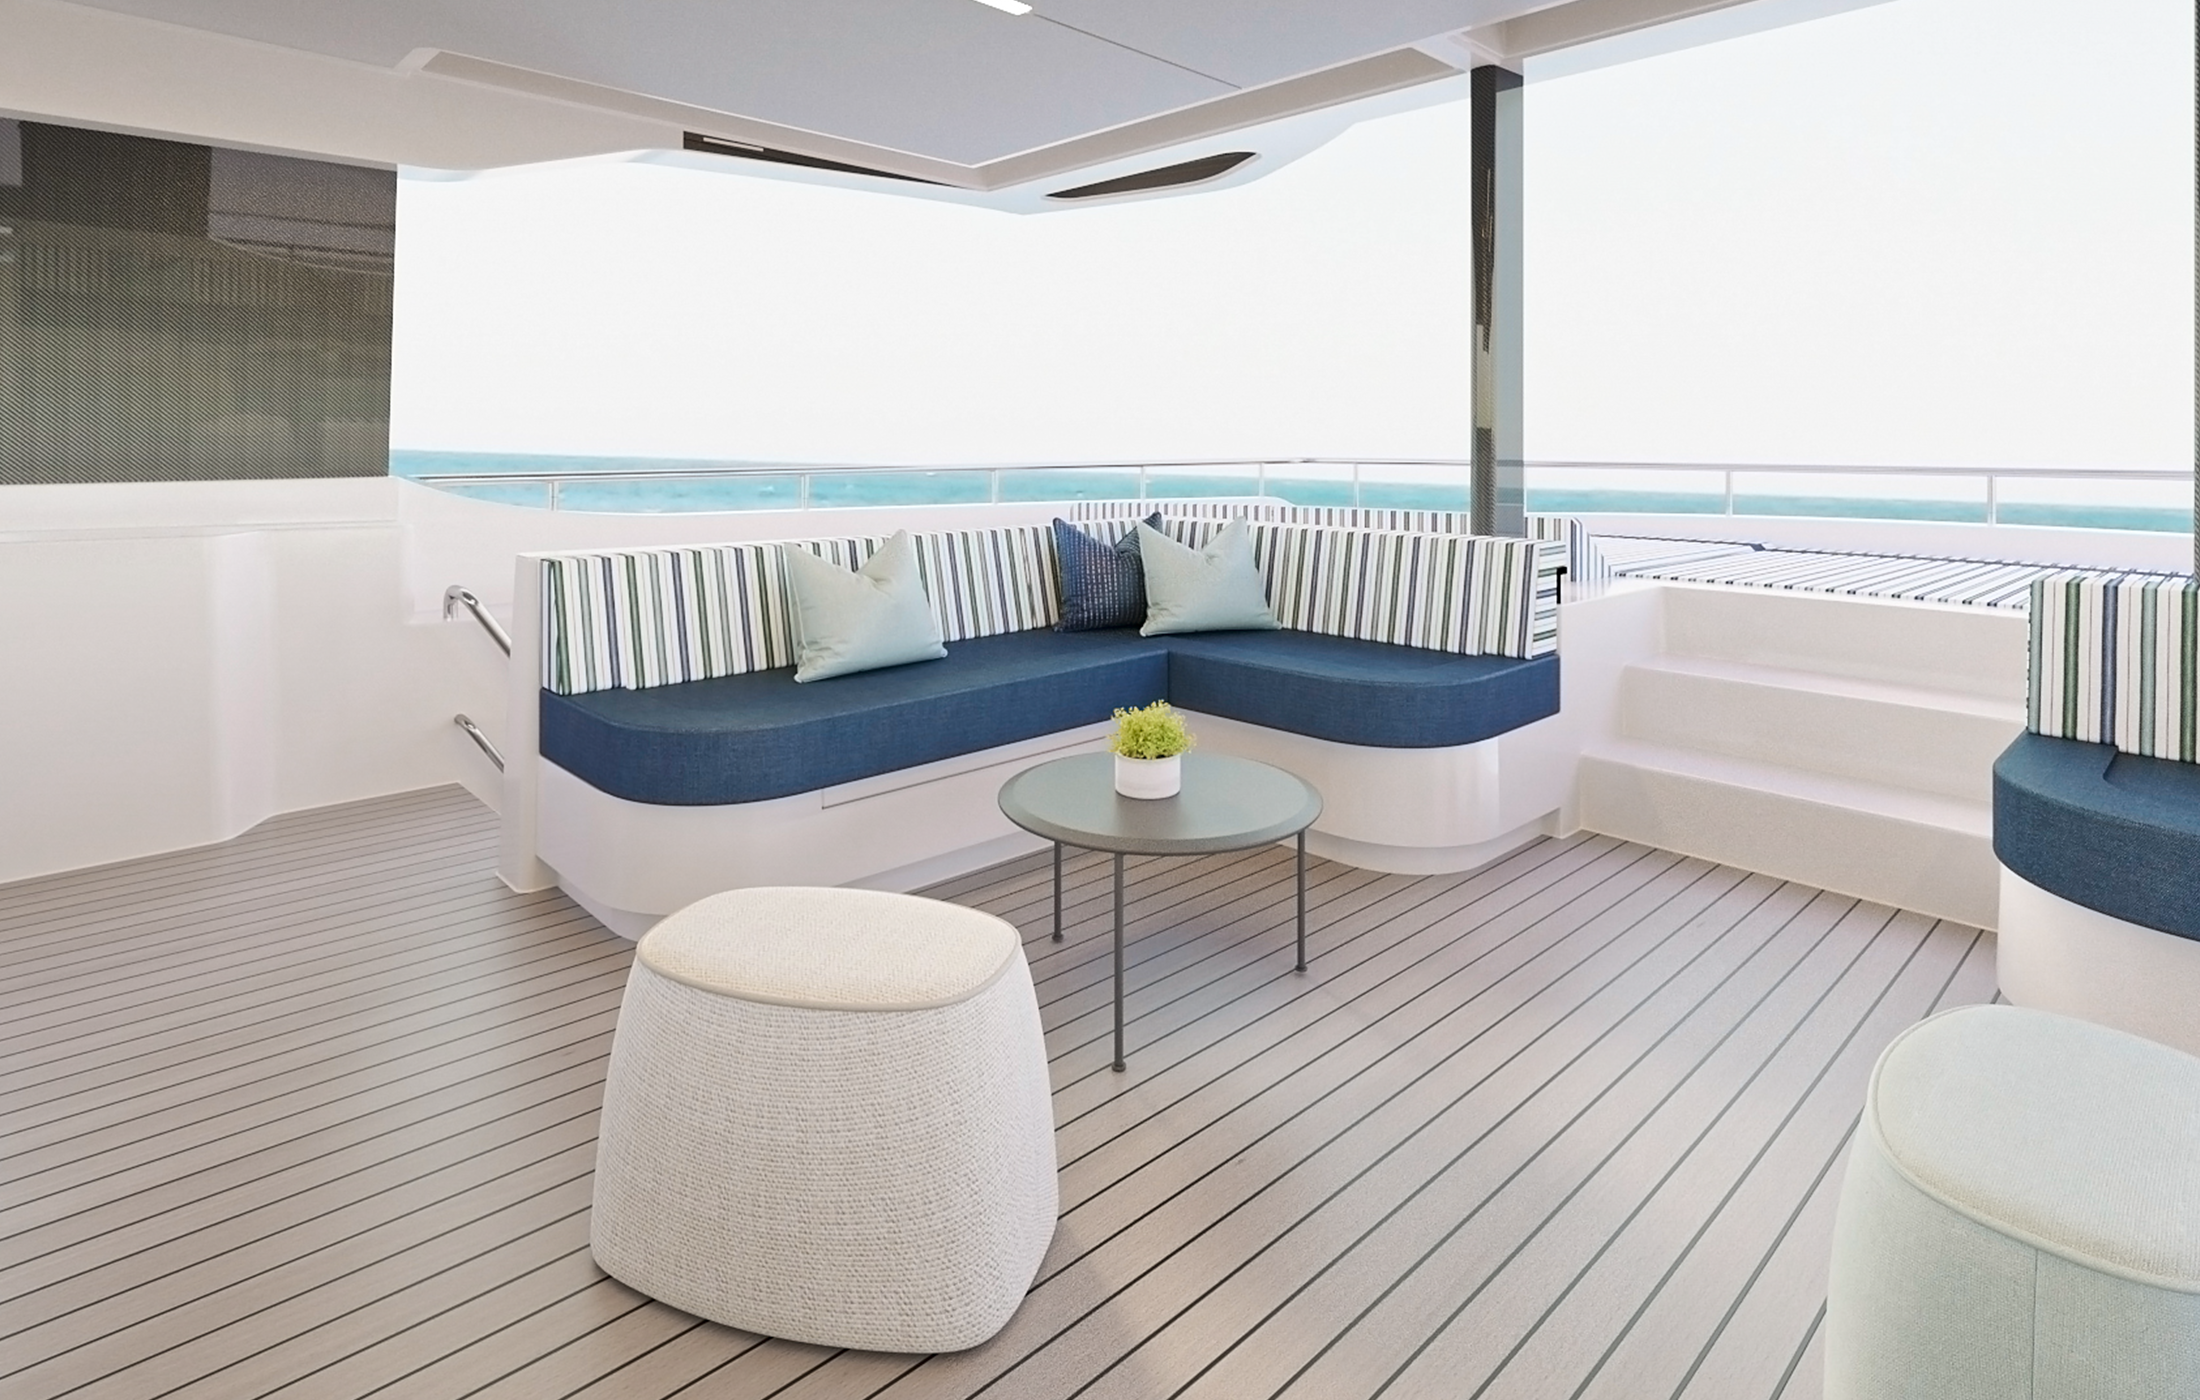 Interior of the open deck of a yacht